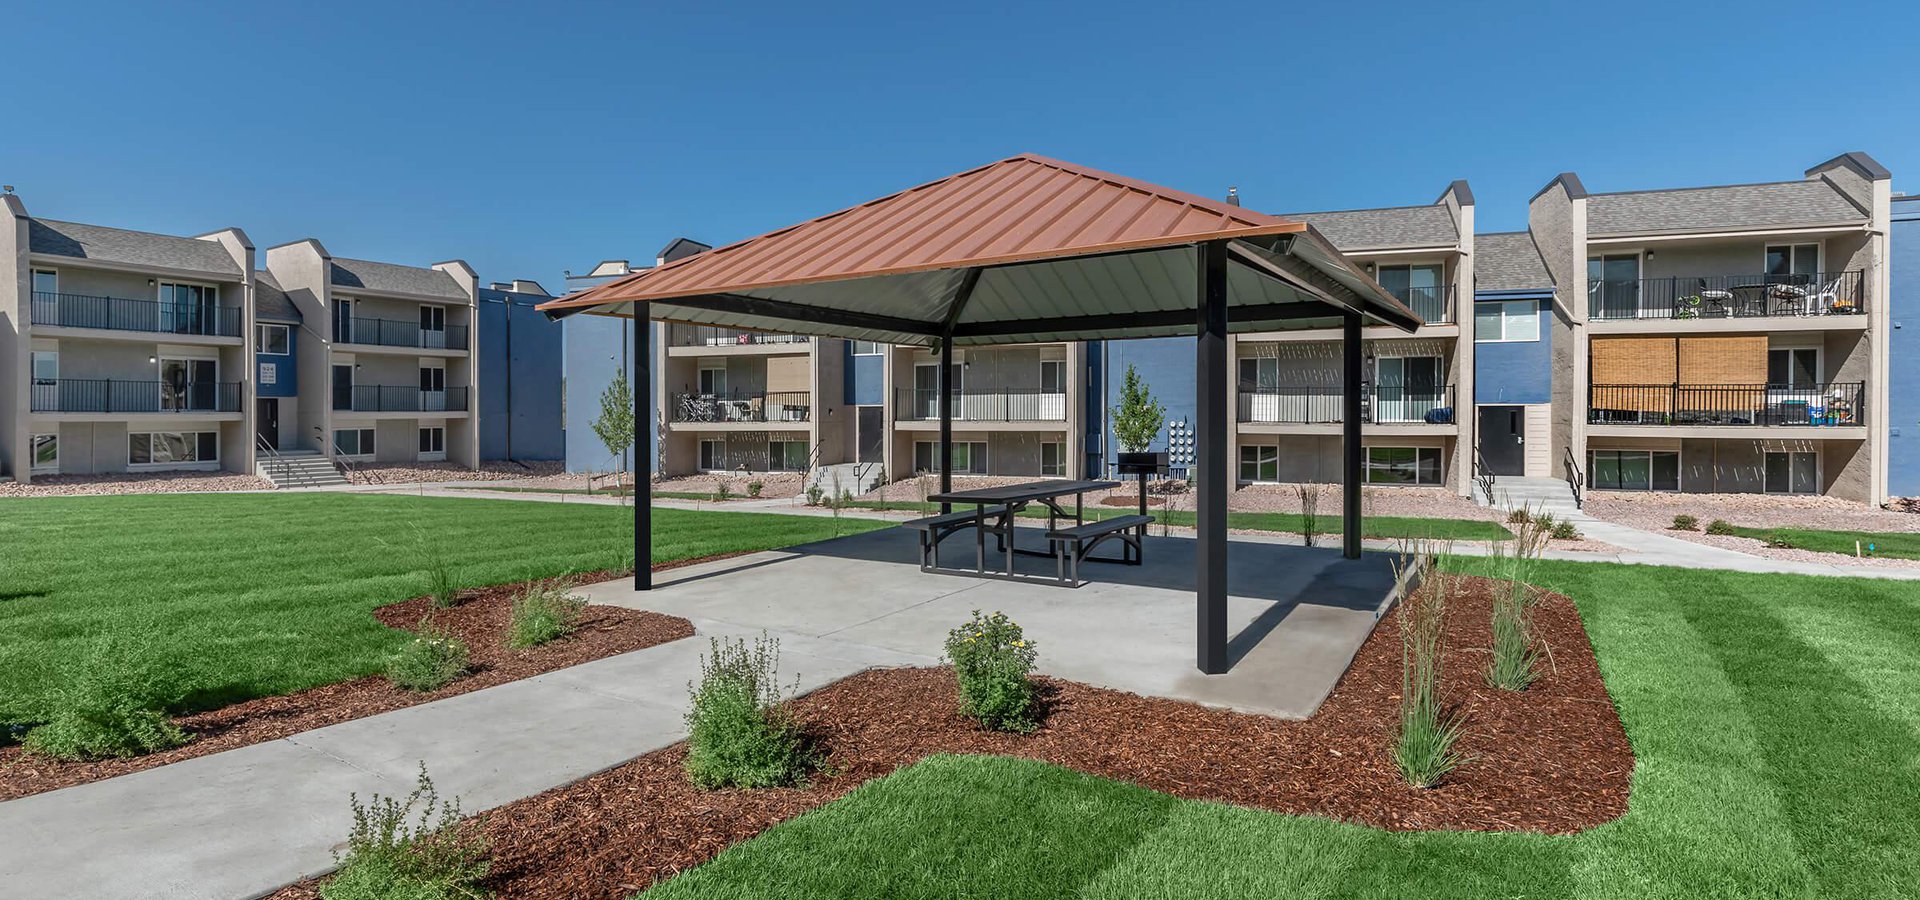 Pergola with outdoor dining and charcoal grill at Parc at Prairie Grass, located in Colorado Springs, CO